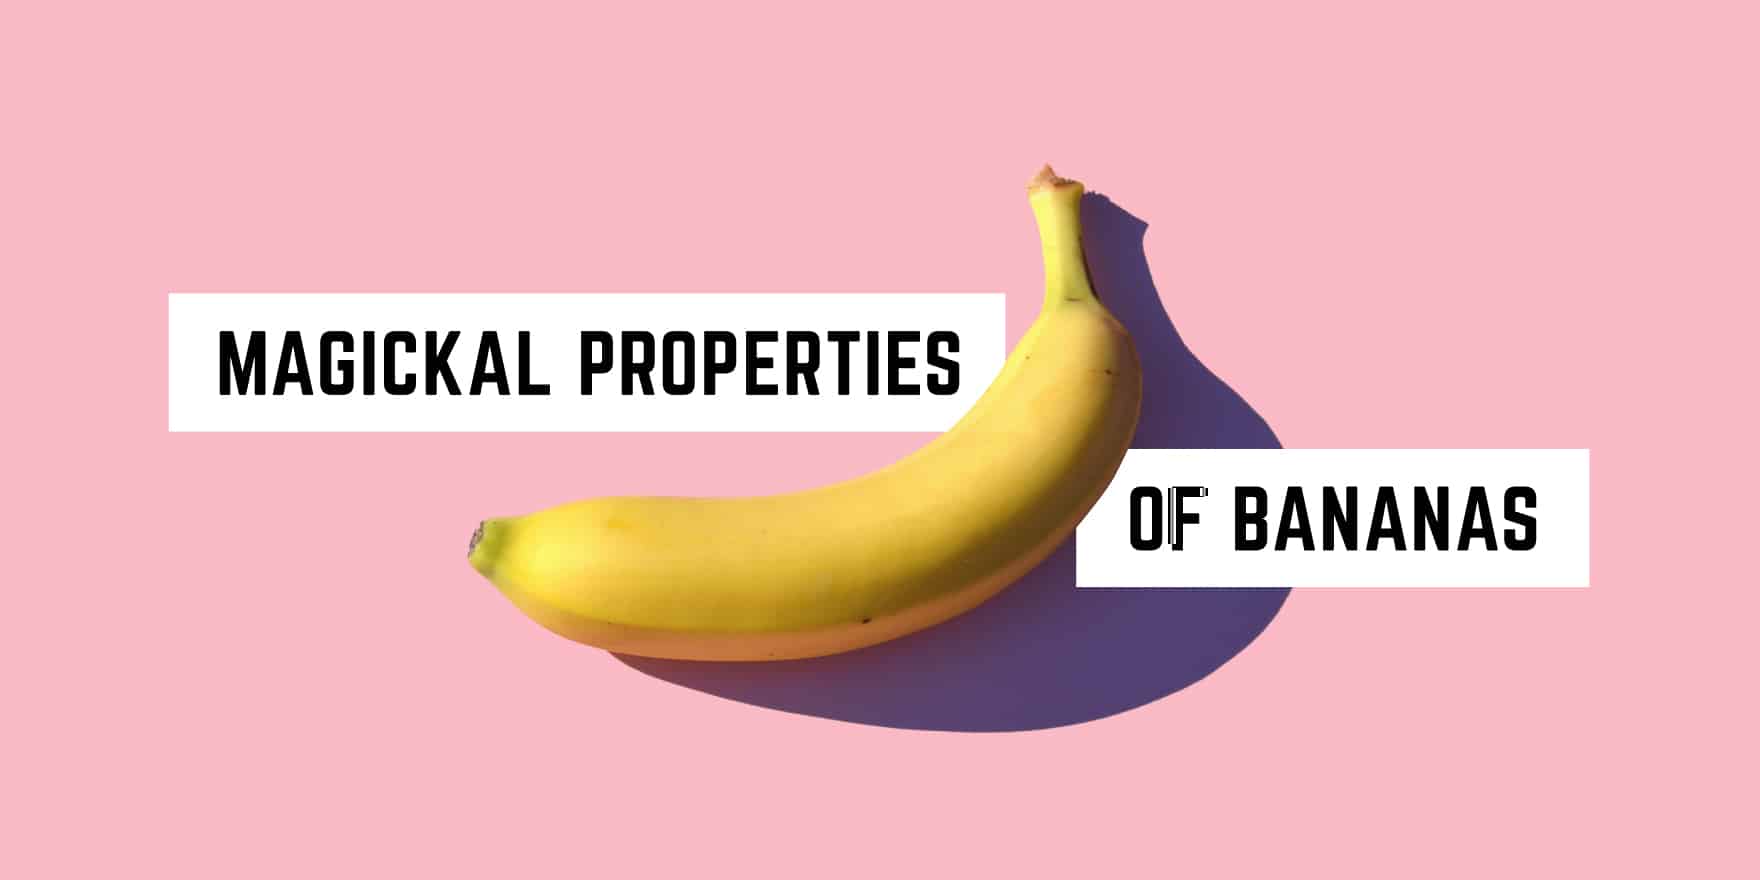 A single ripe banana on a pink background with the whimsical text "metaphysical shop presents: magickal properties of bananas" overlaying the image, suggesting a playful look at the fruit’s